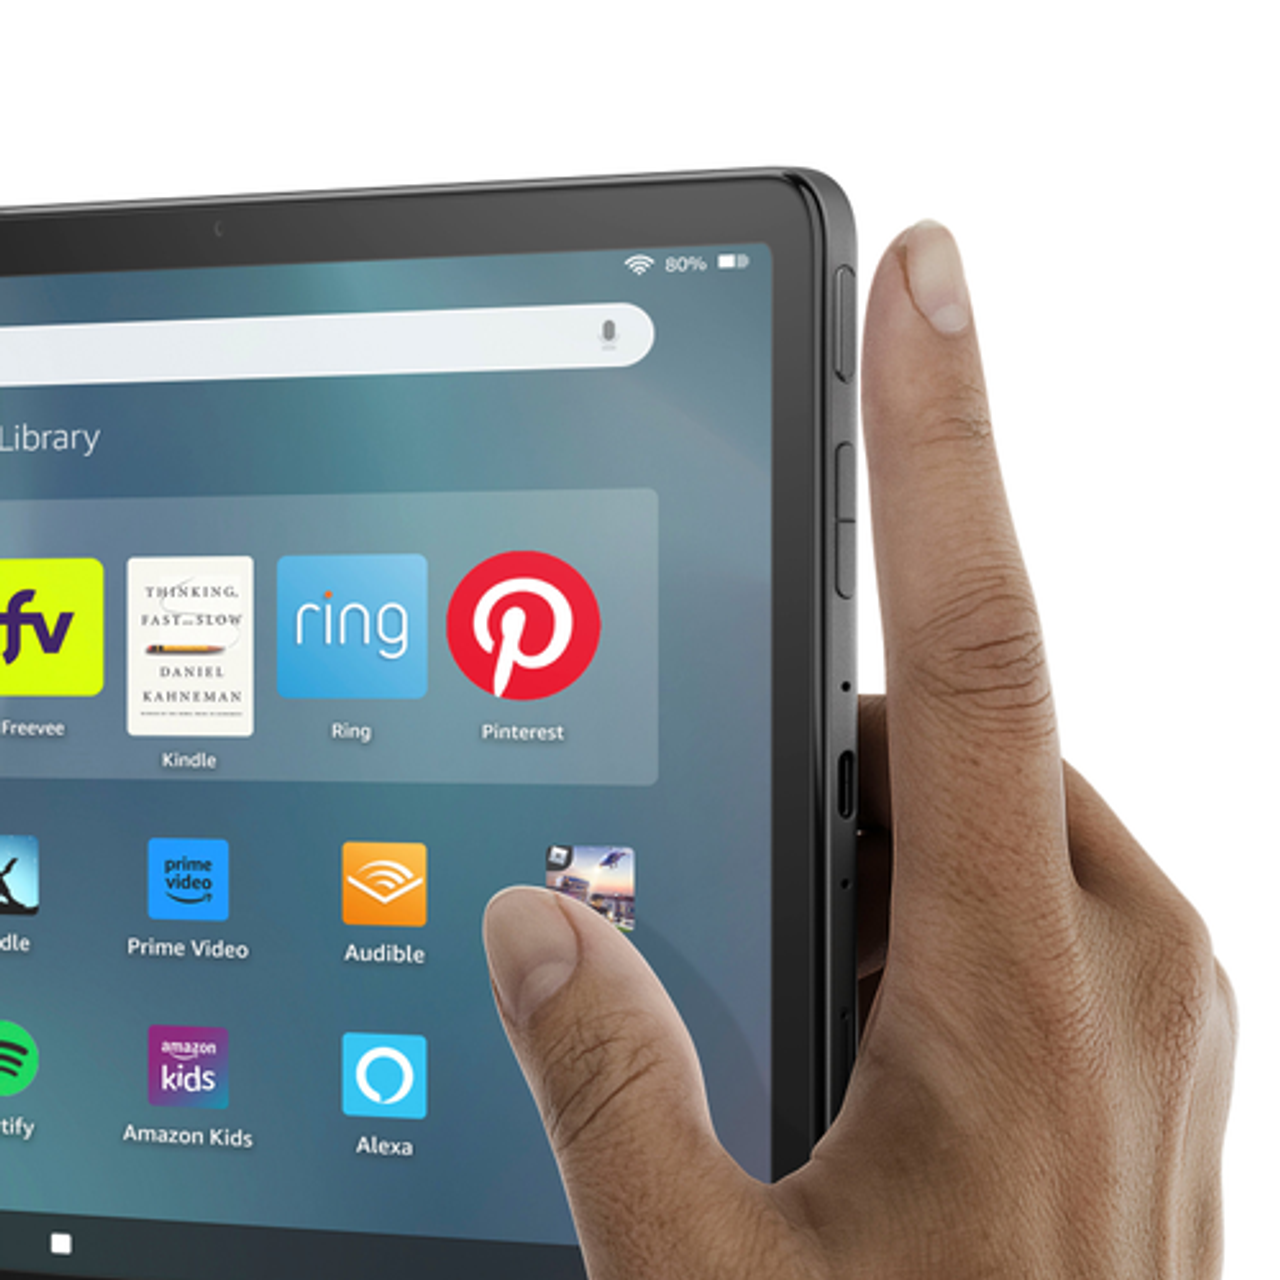 Amazon - Fire Max 11 tablet, our most powerful tablet yet, vivid 11" display, octa-core processor, 4 GB RAM, 64 GB - Gray